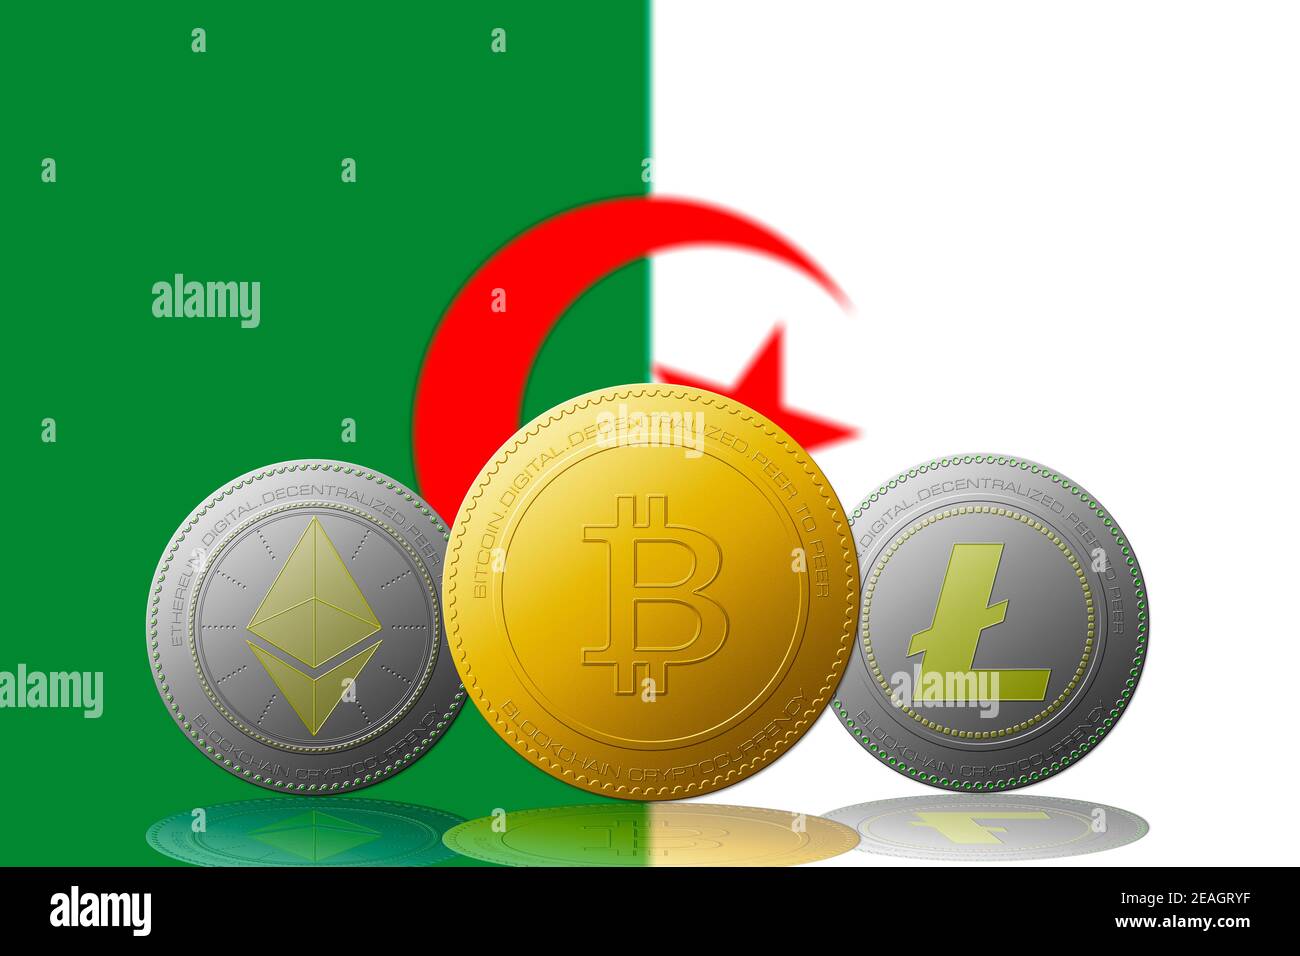 Three cryptocurrencies Bitcoin  Ethereum and Litecoin with ALGERIA flag on background. Stock Photo